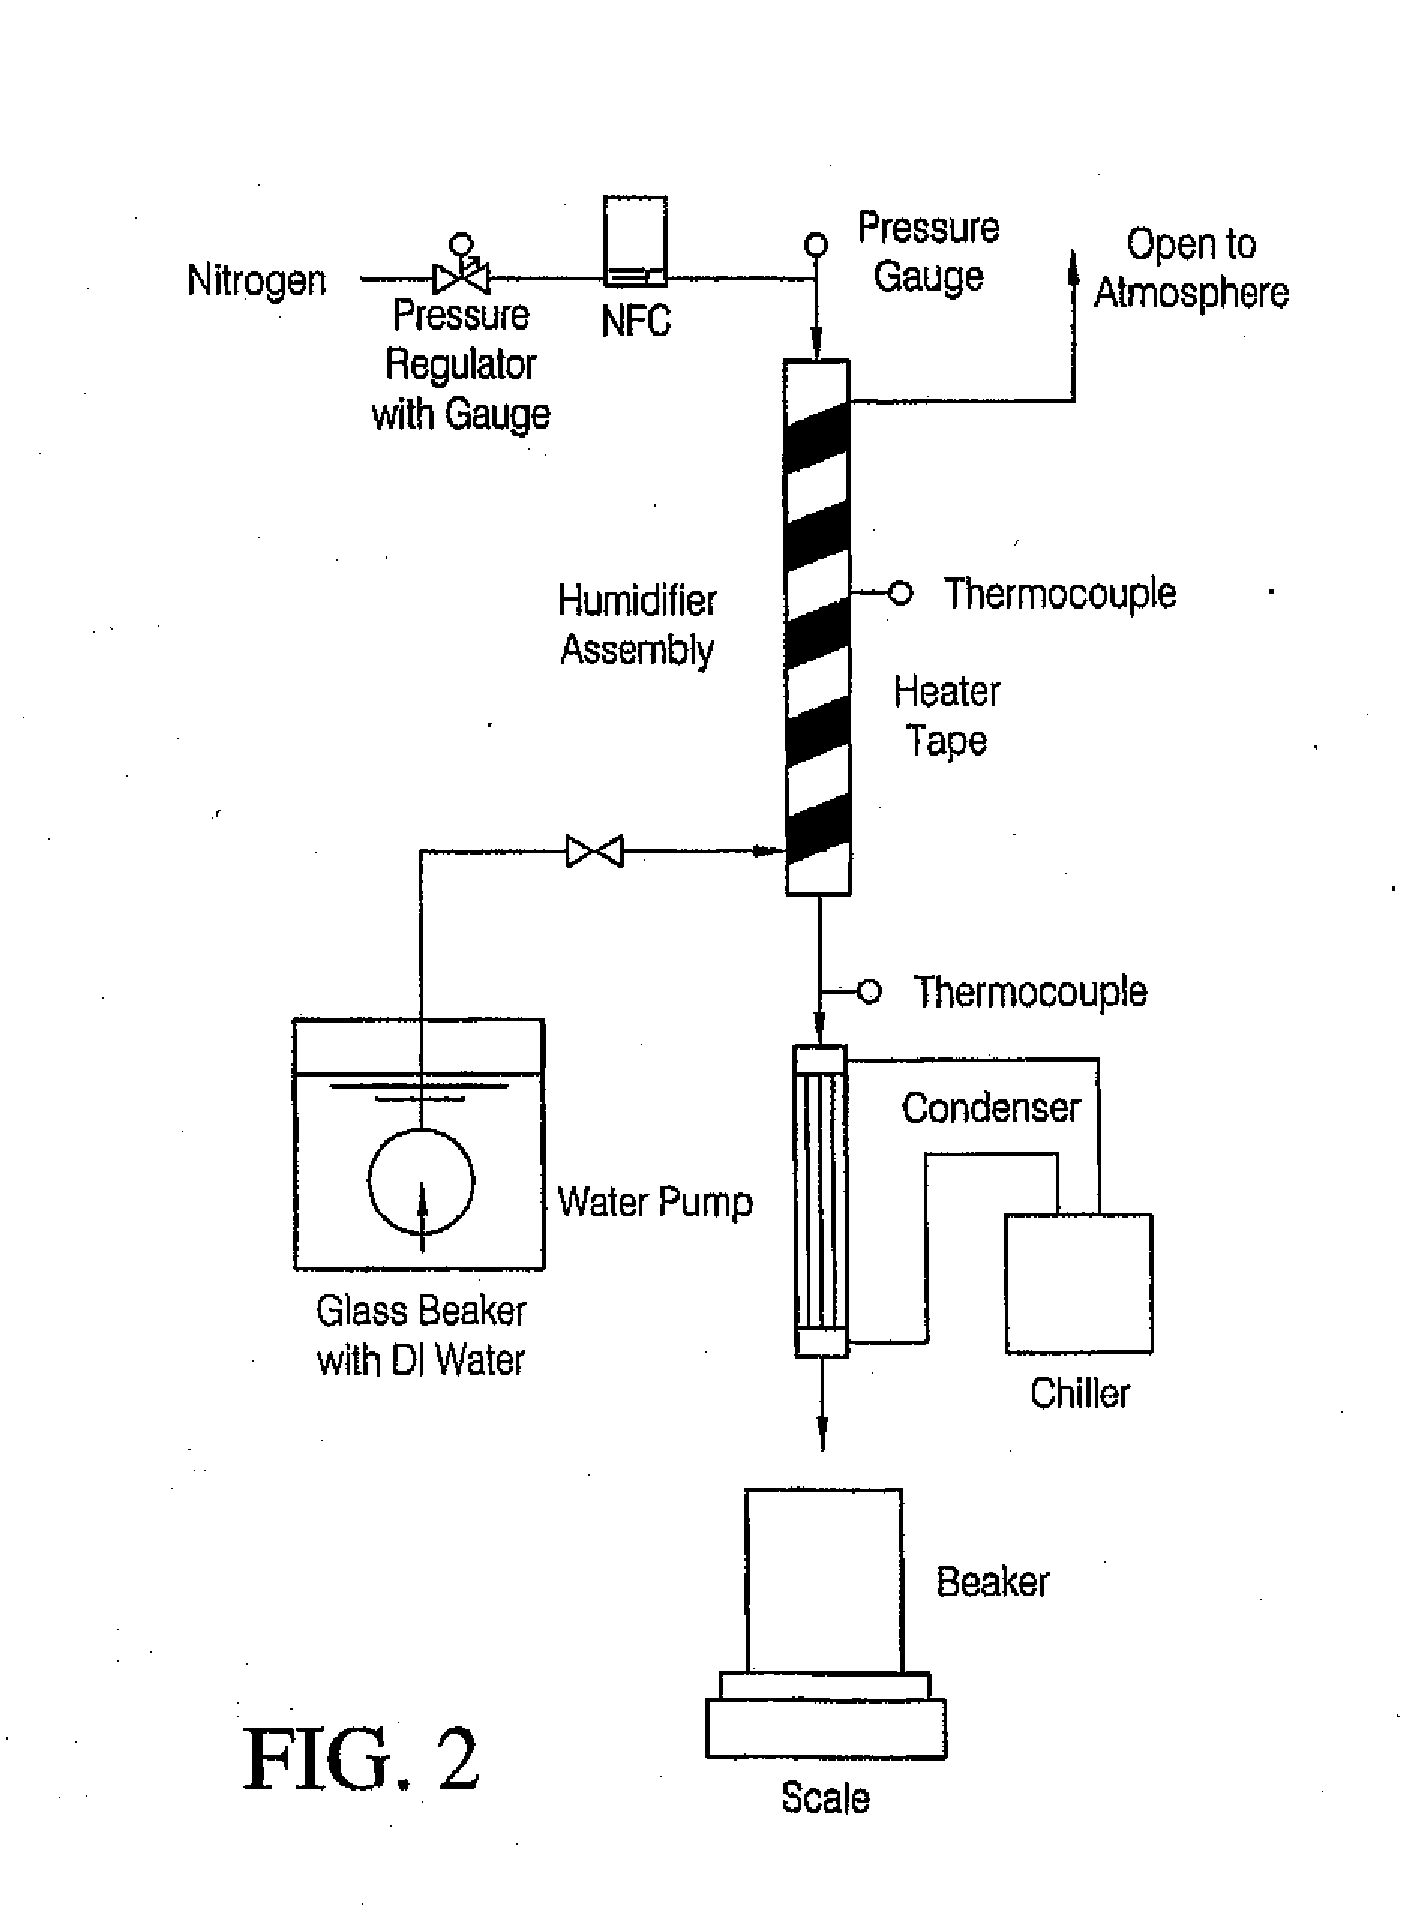 Vaporizer for delivery of low vapor pressure gases